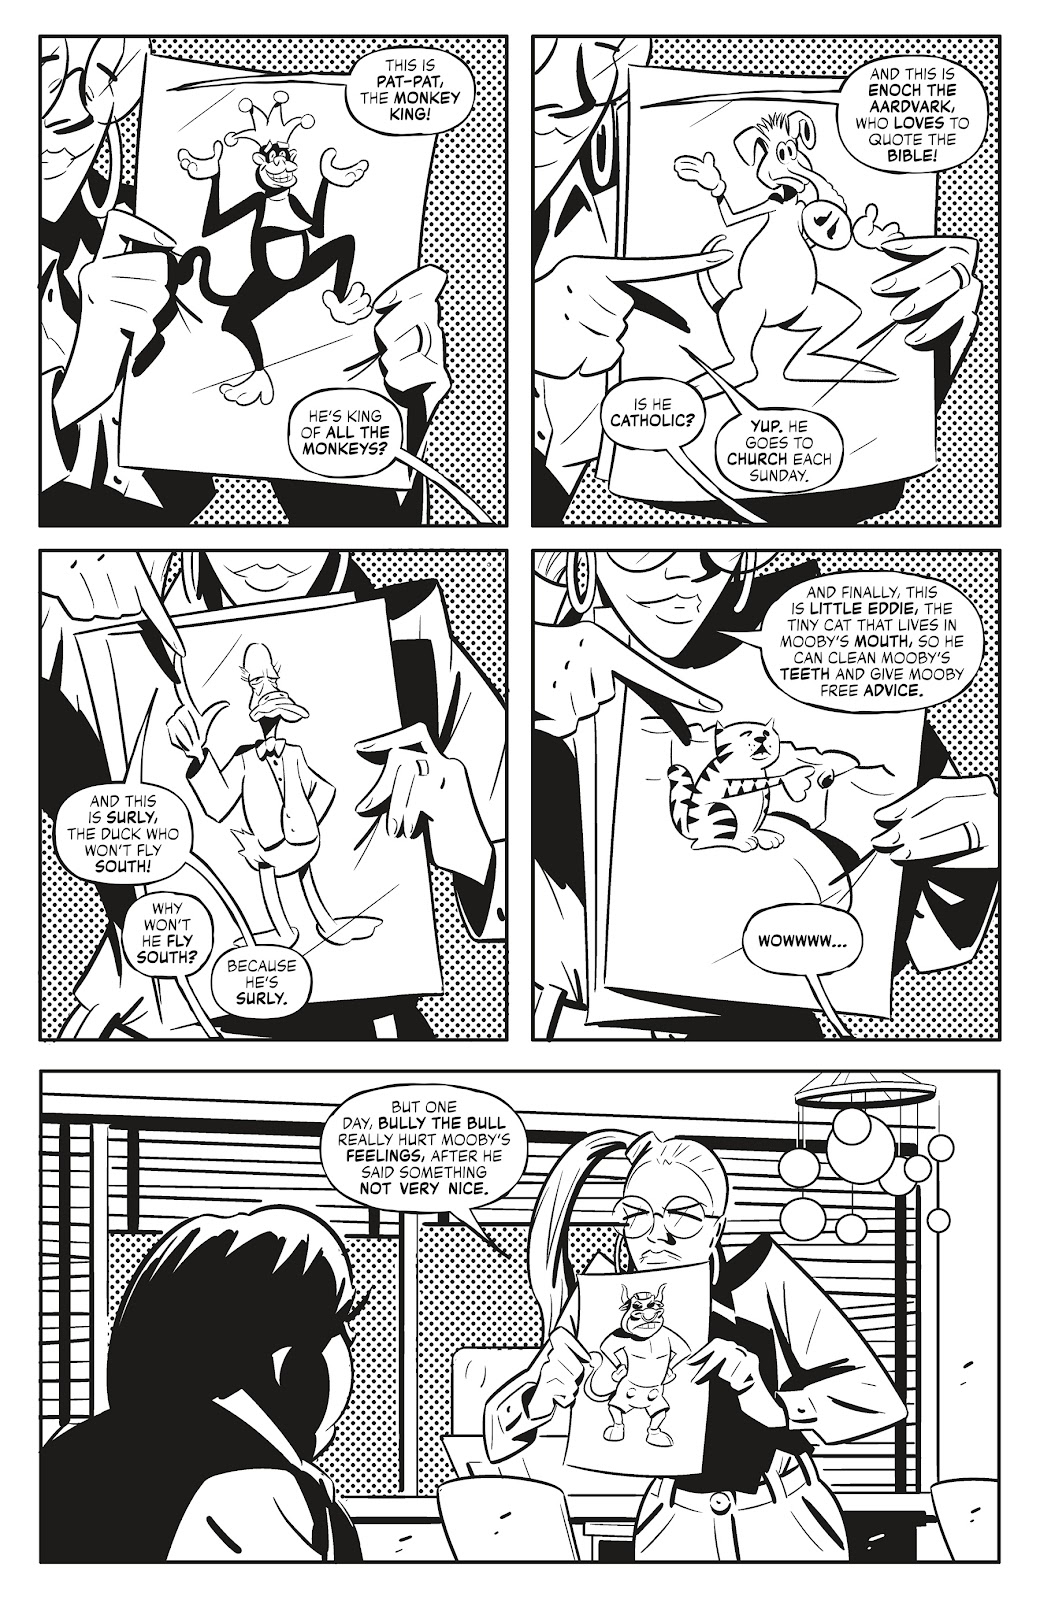 Quick Stops Vol. 2 issue 1 - Page 13